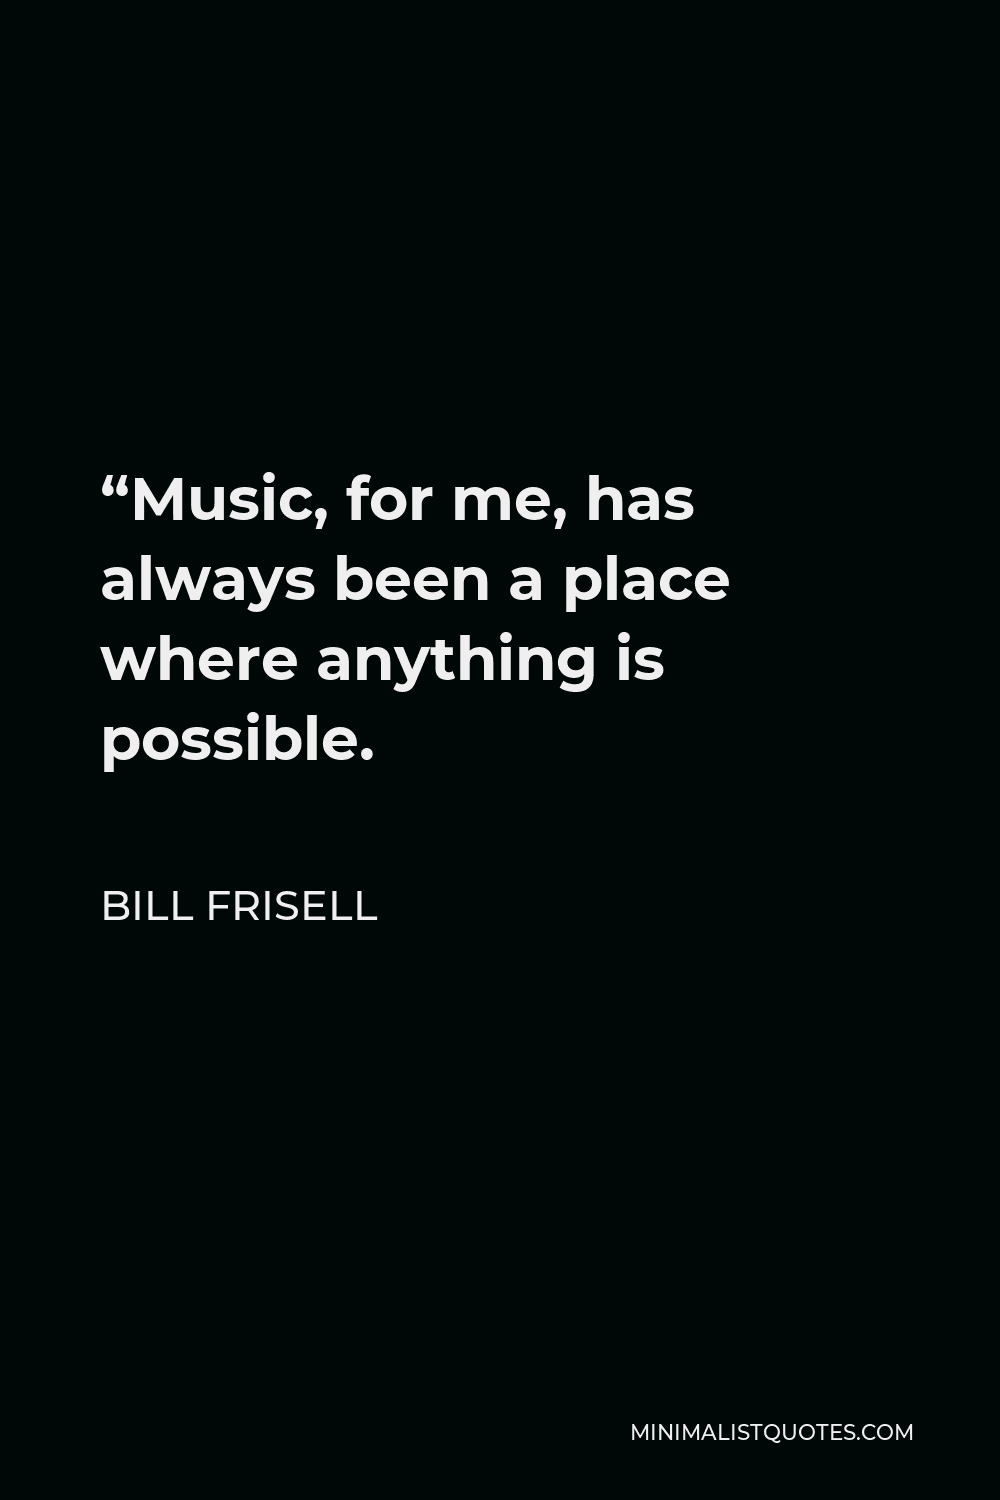 Bill Frisell Quote - “Music, for me, has always been a place where anything is possible.